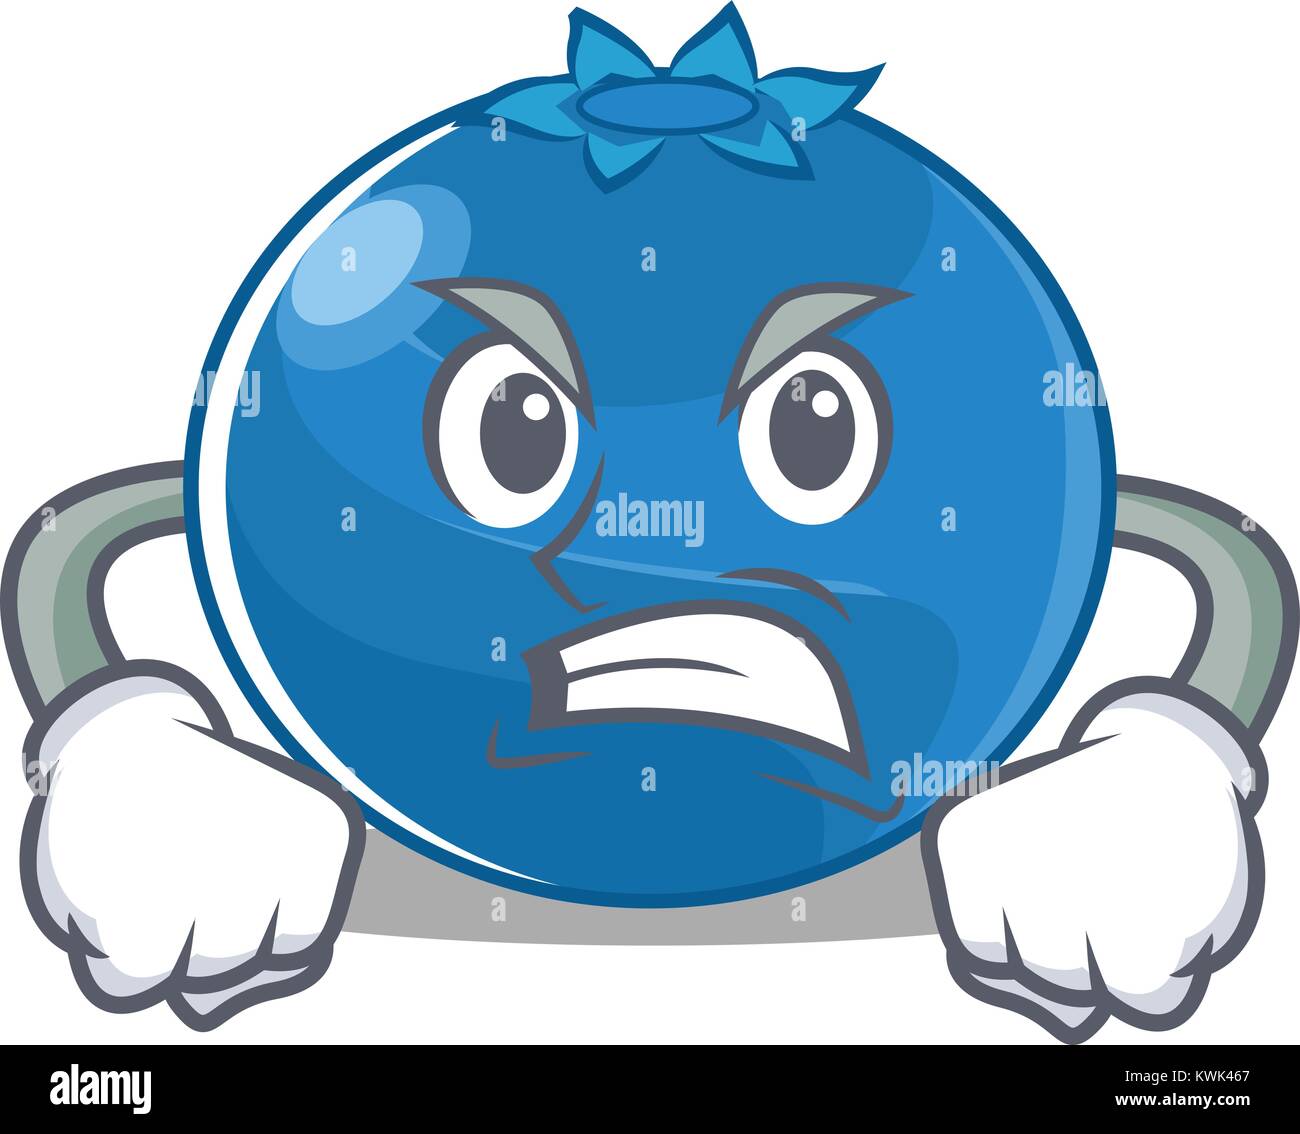 Angry blueberry character cartoon style Stock Vector